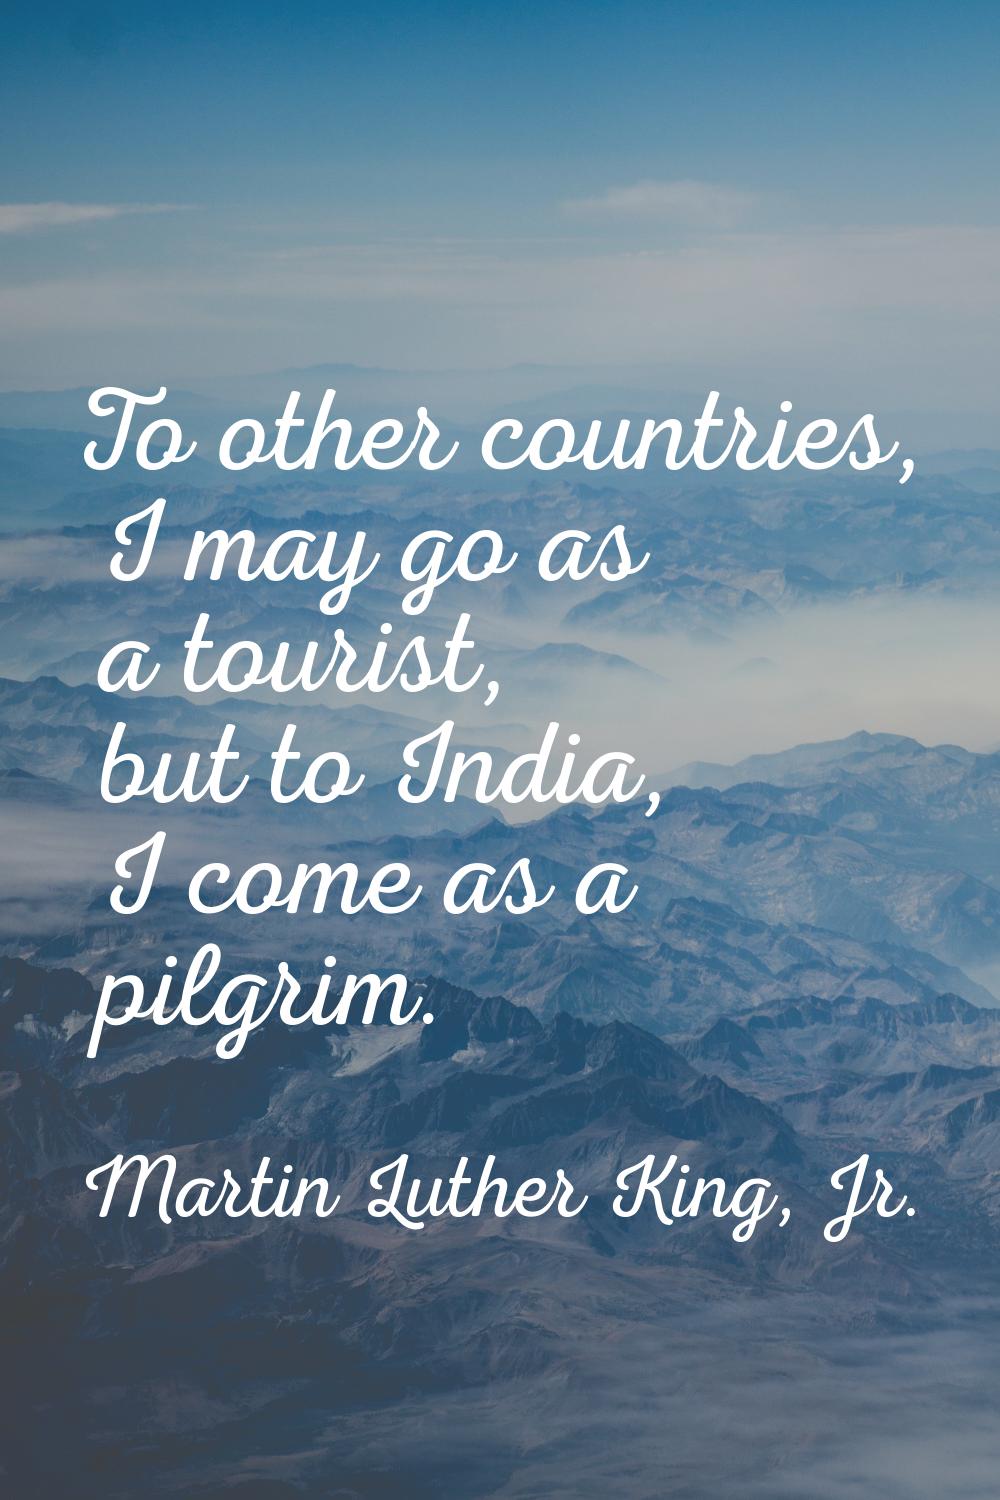 To other countries, I may go as a tourist, but to India, I come as a pilgrim.